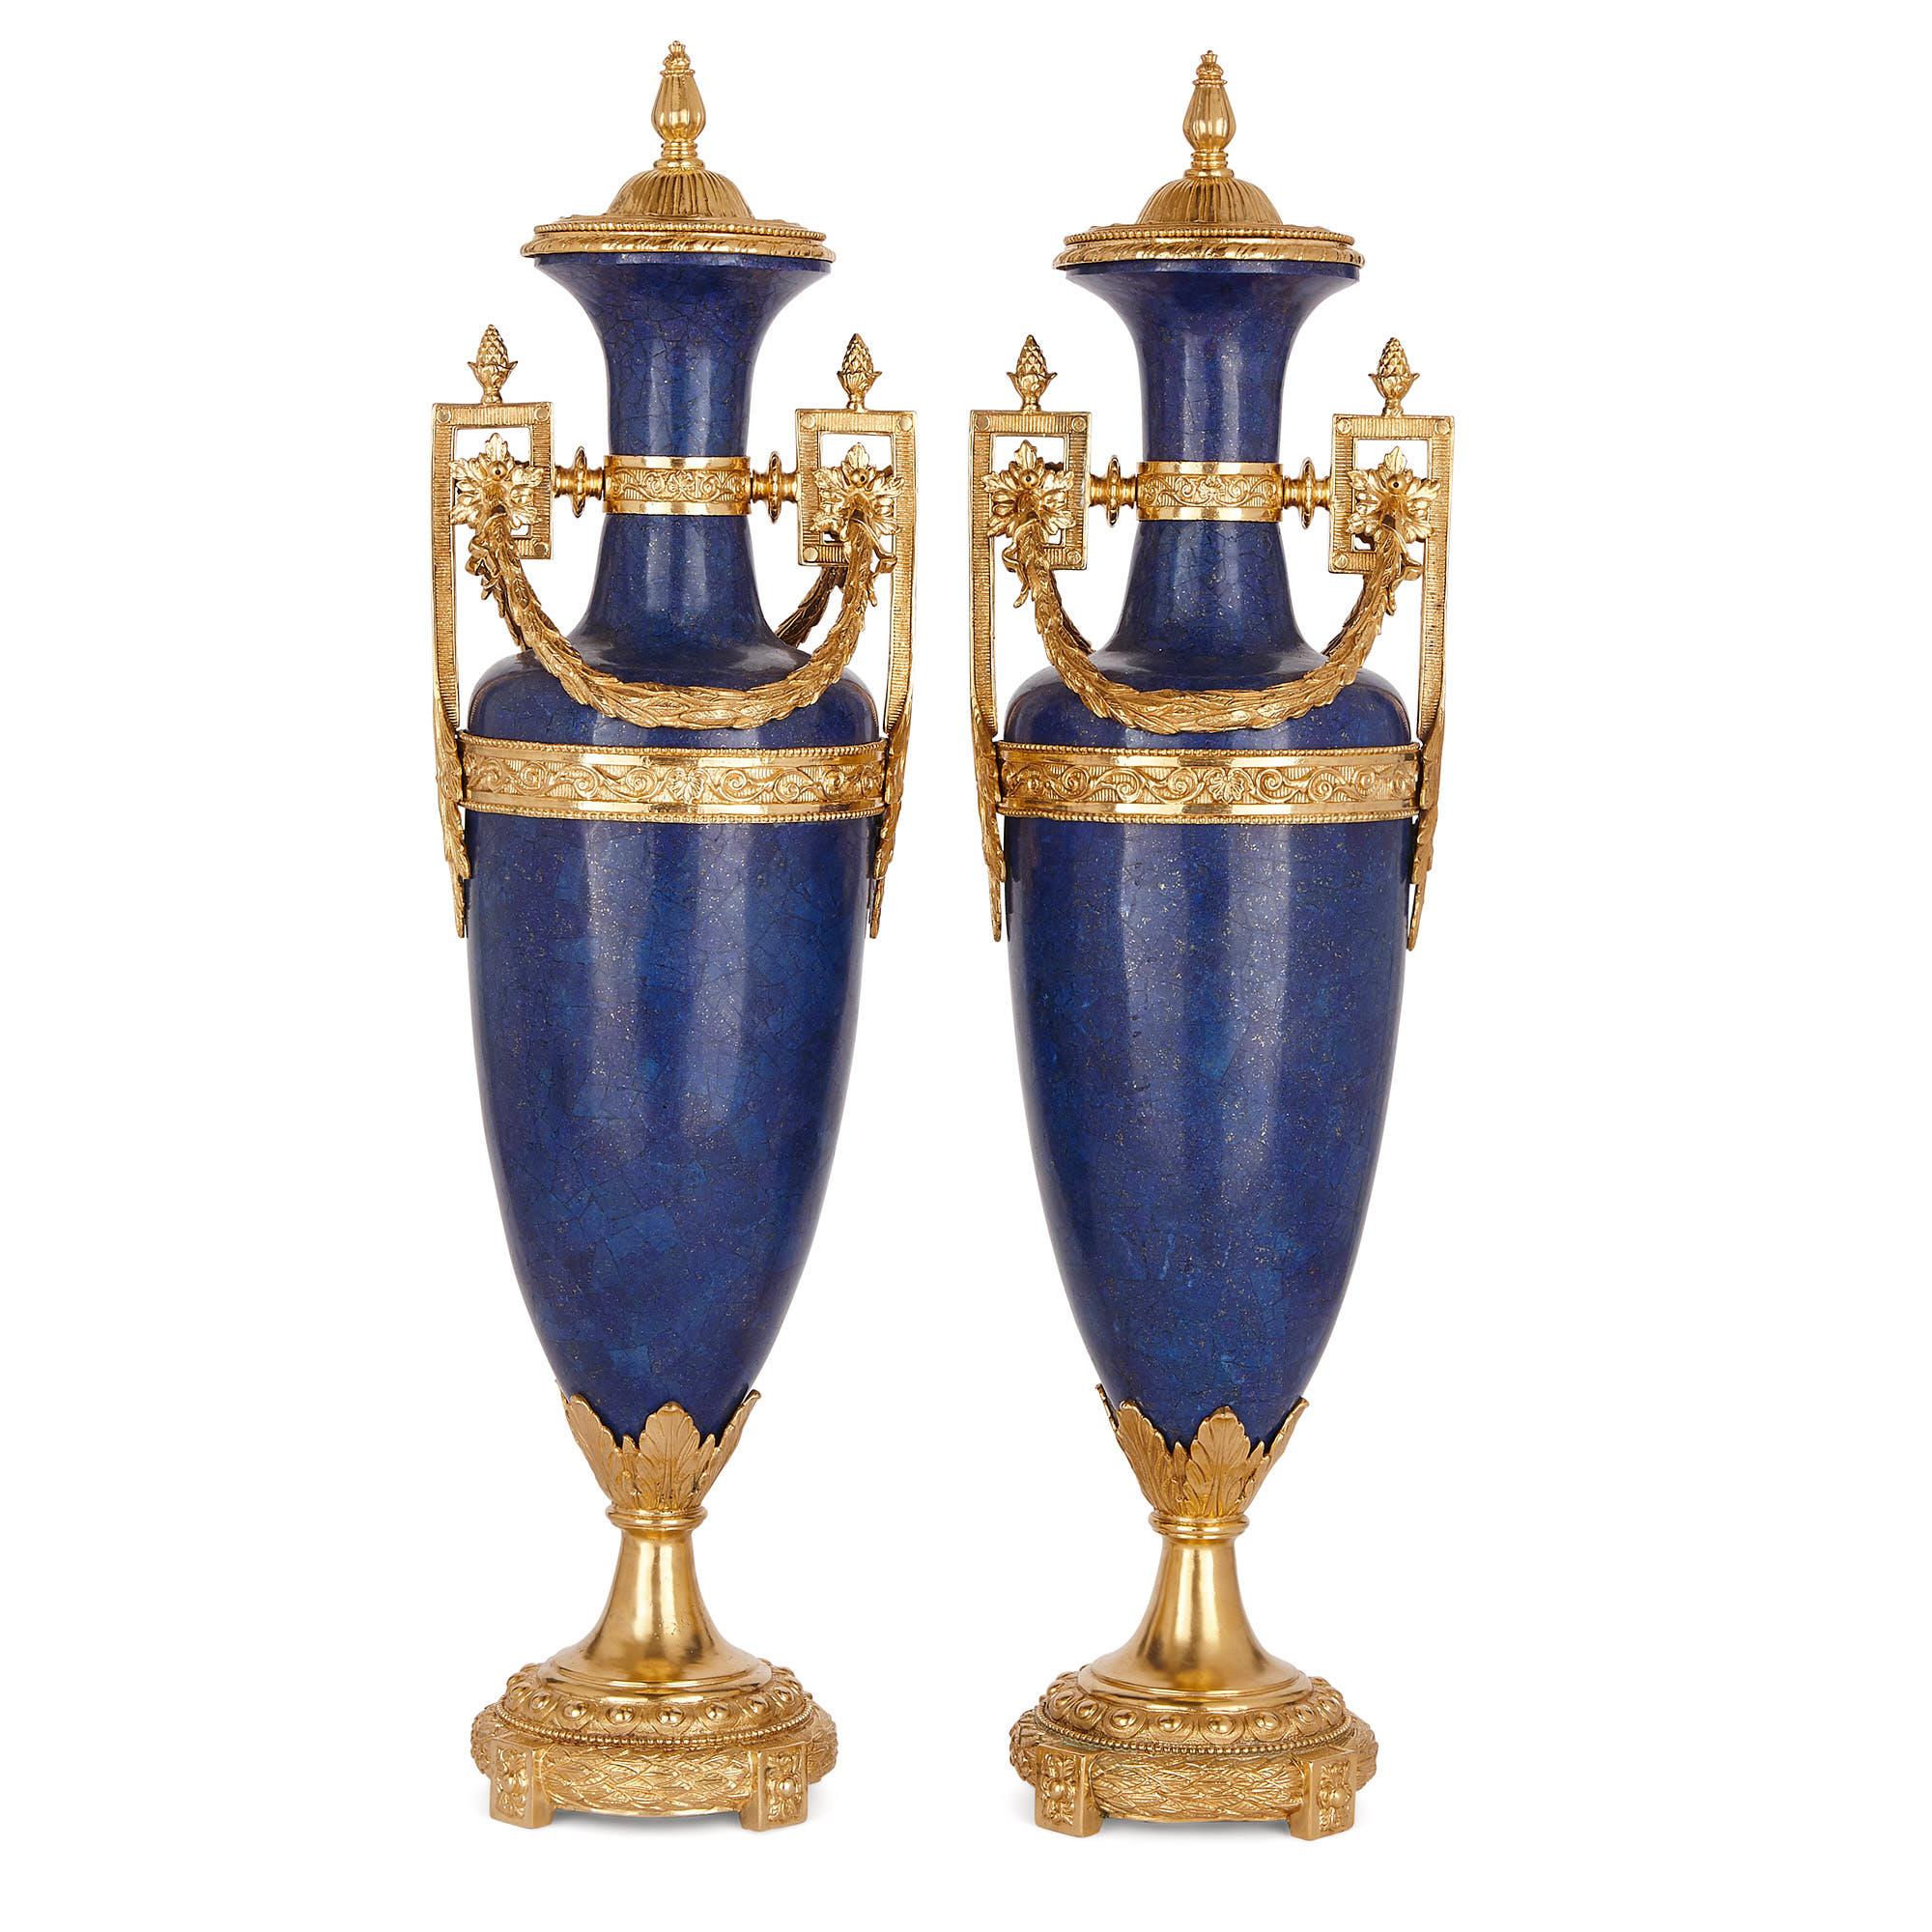 With their refined, neoclassical overall form and ornament, these vases are clearly inspired by the style of decorative arts produced in France during the reign of Louis XVI (1774-1792). Partly in a reaction against the excesses of the Rococo, the